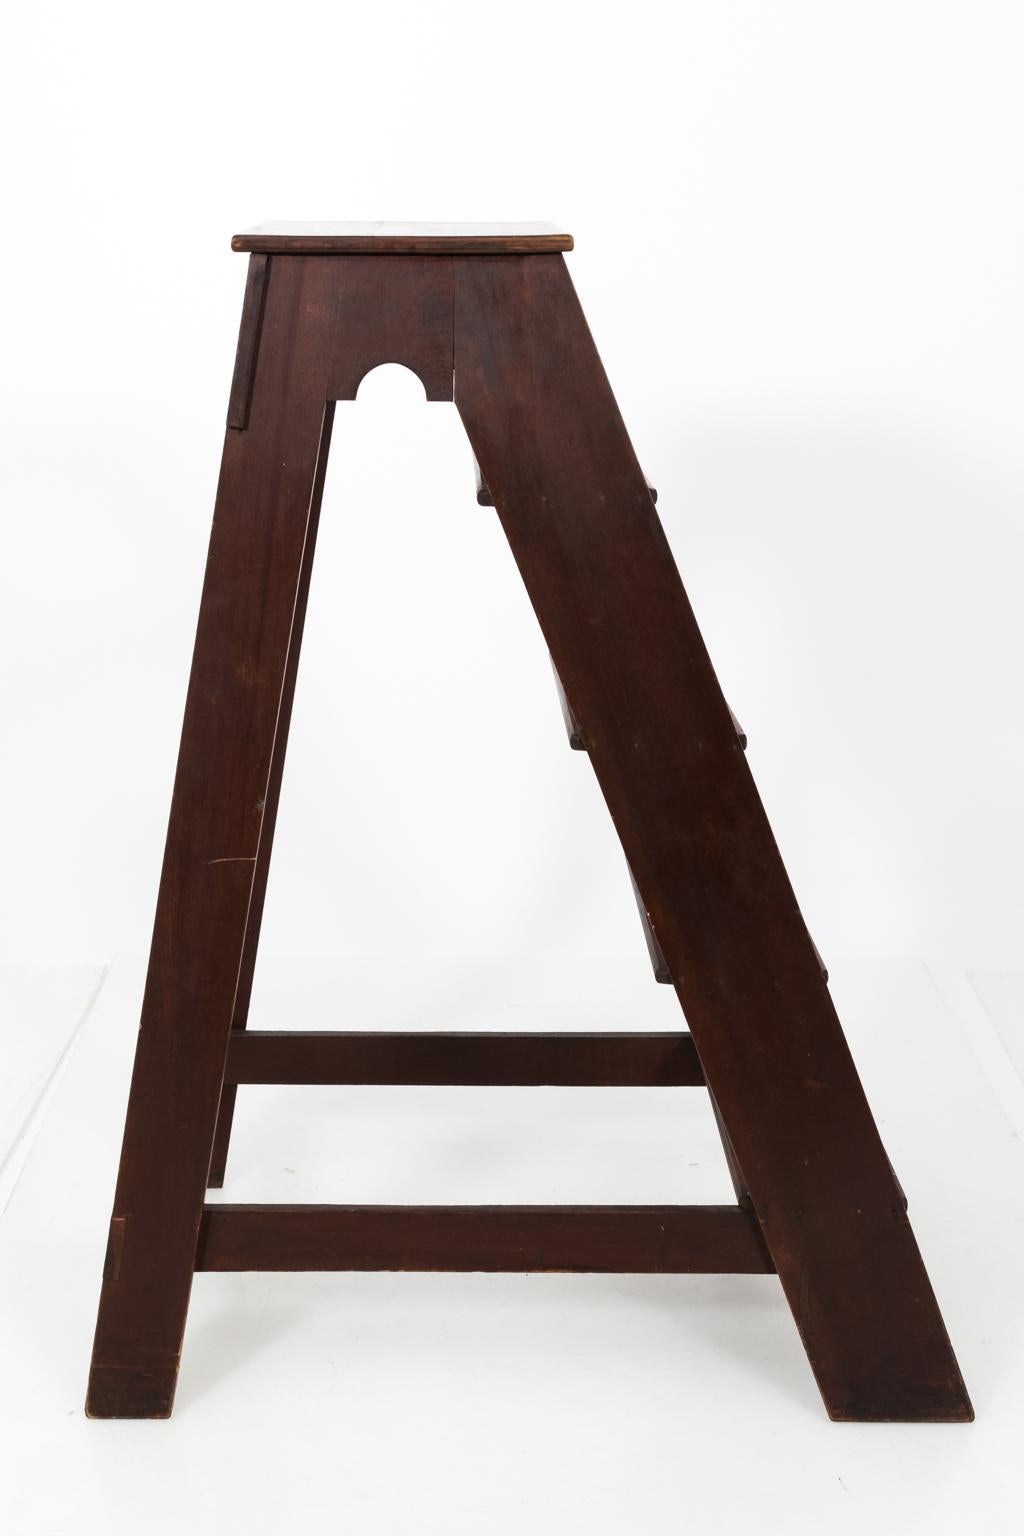 Early 20th century mahogany ladder steps. This ladder consists of five steps, and is in a working condition.